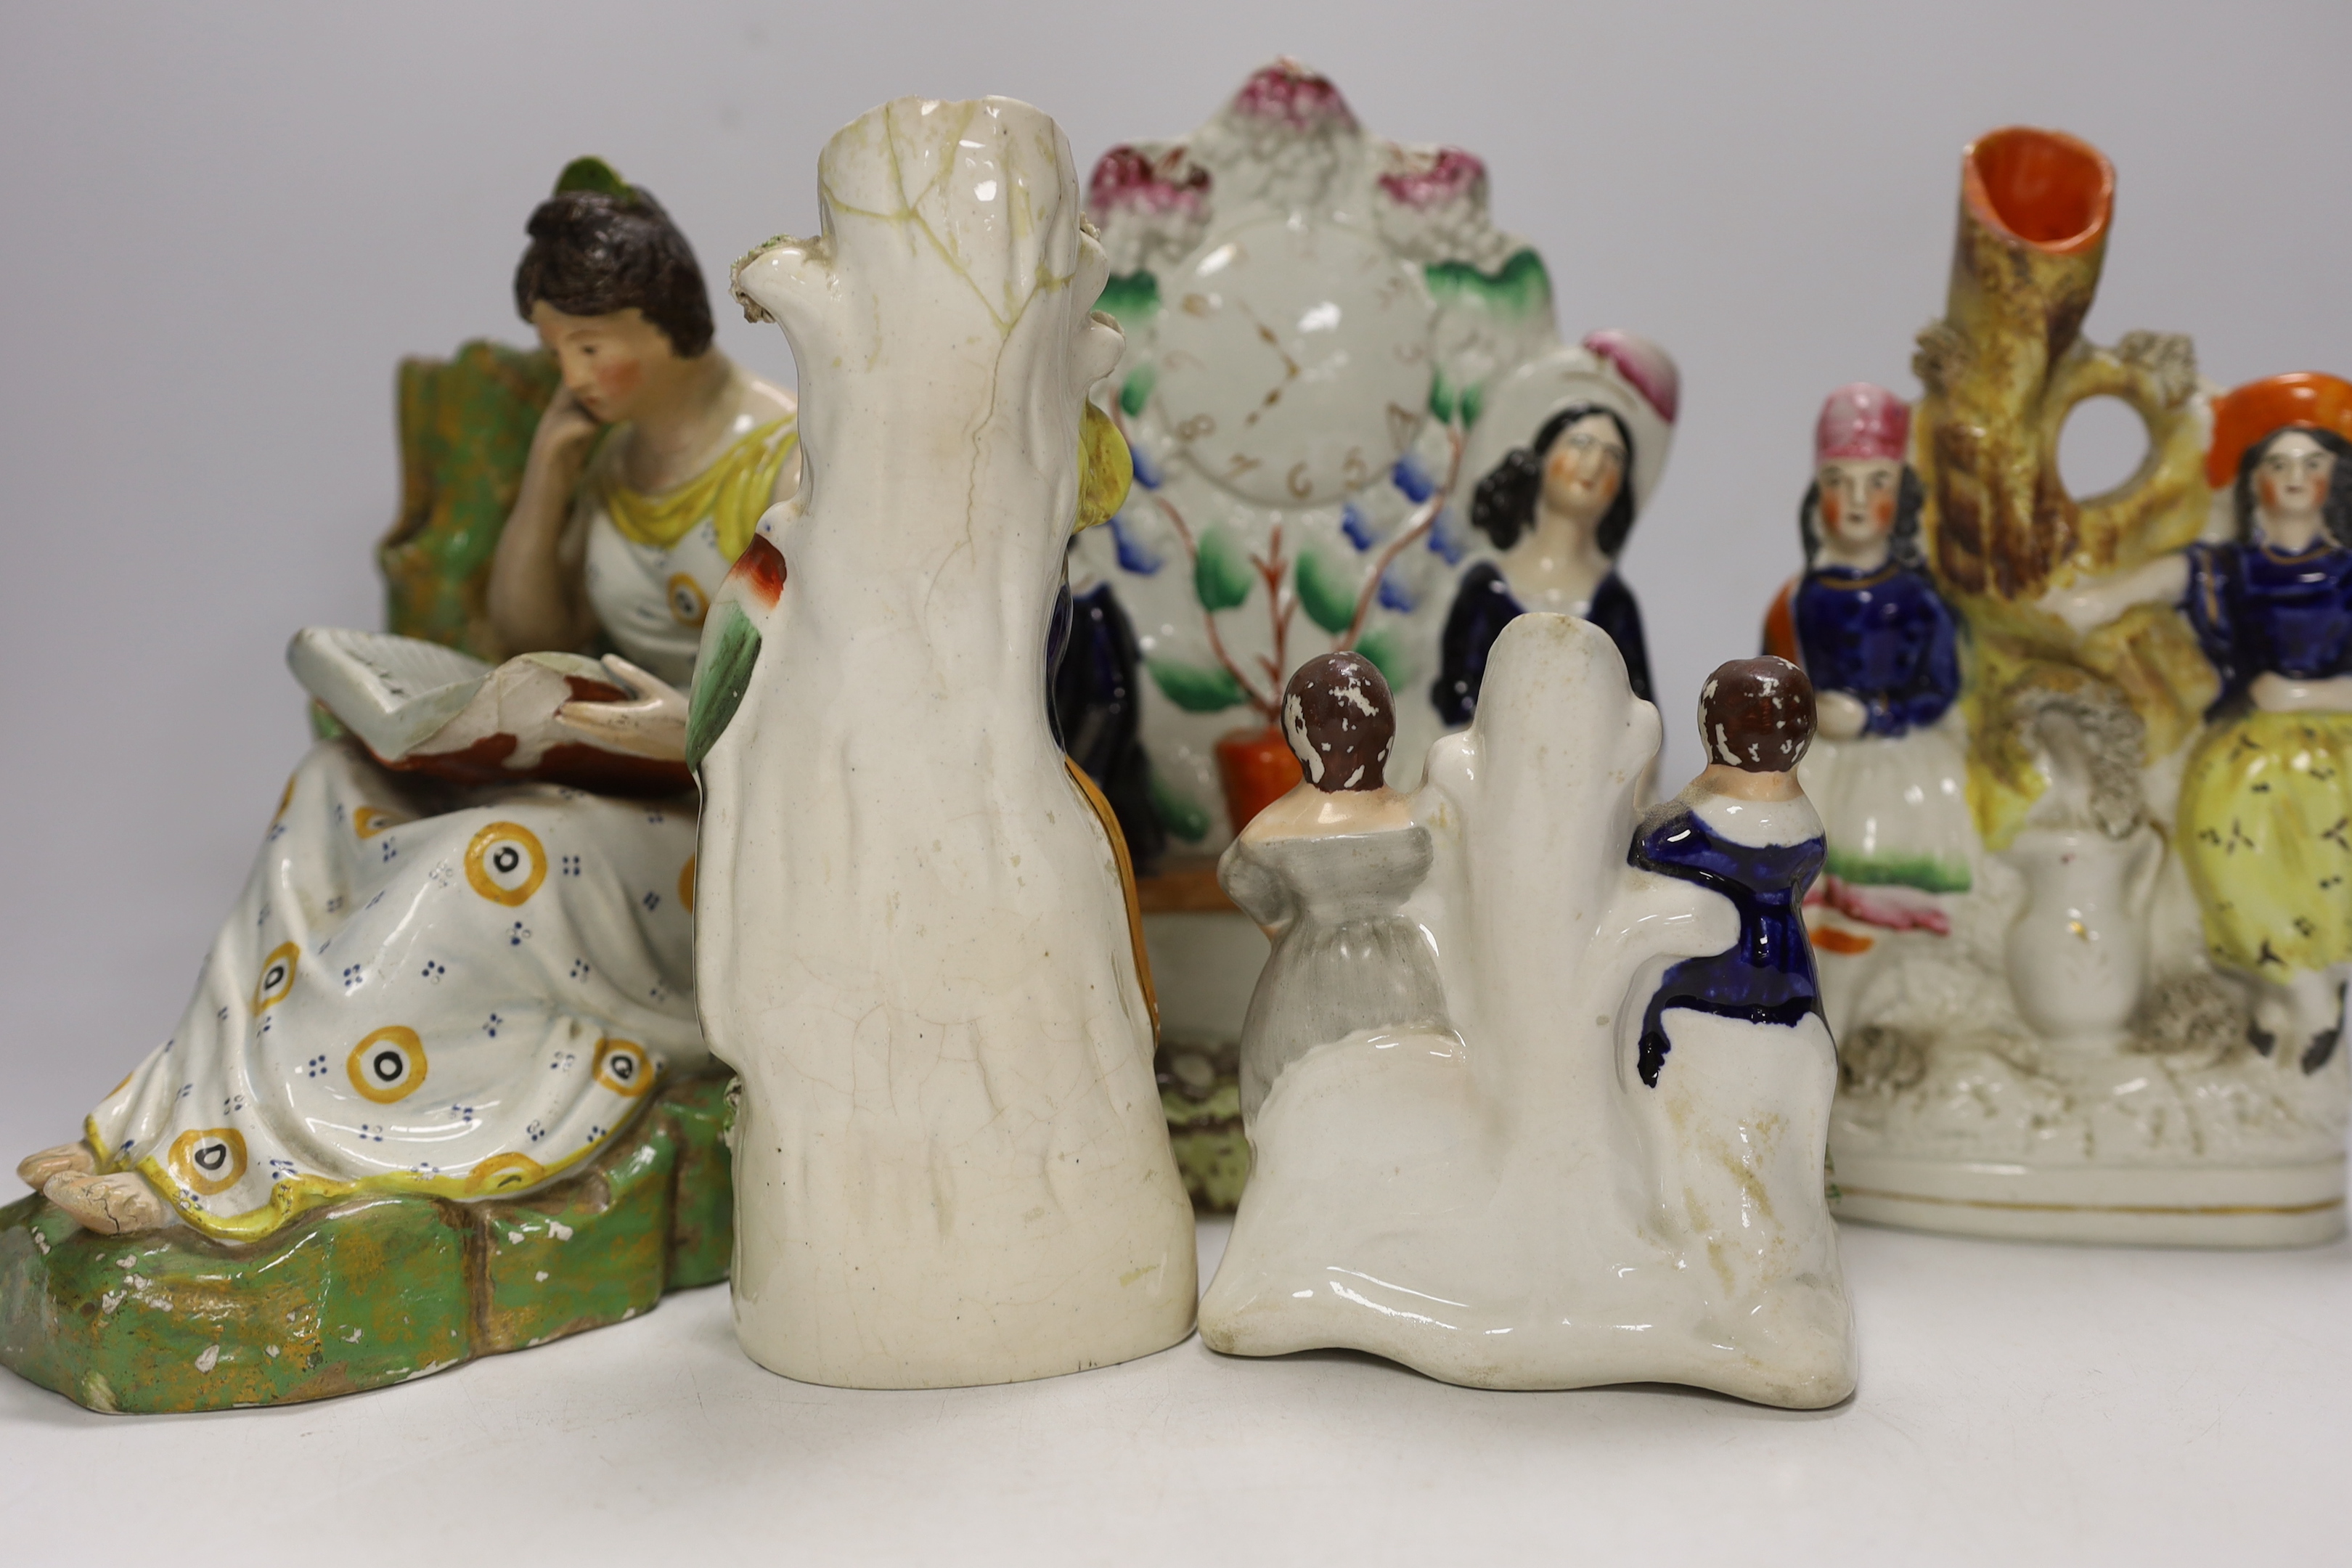 An early 19th century Staffordshire pearlware figure of a seated lady and seven mid 19th century Staffordshire pottery figures